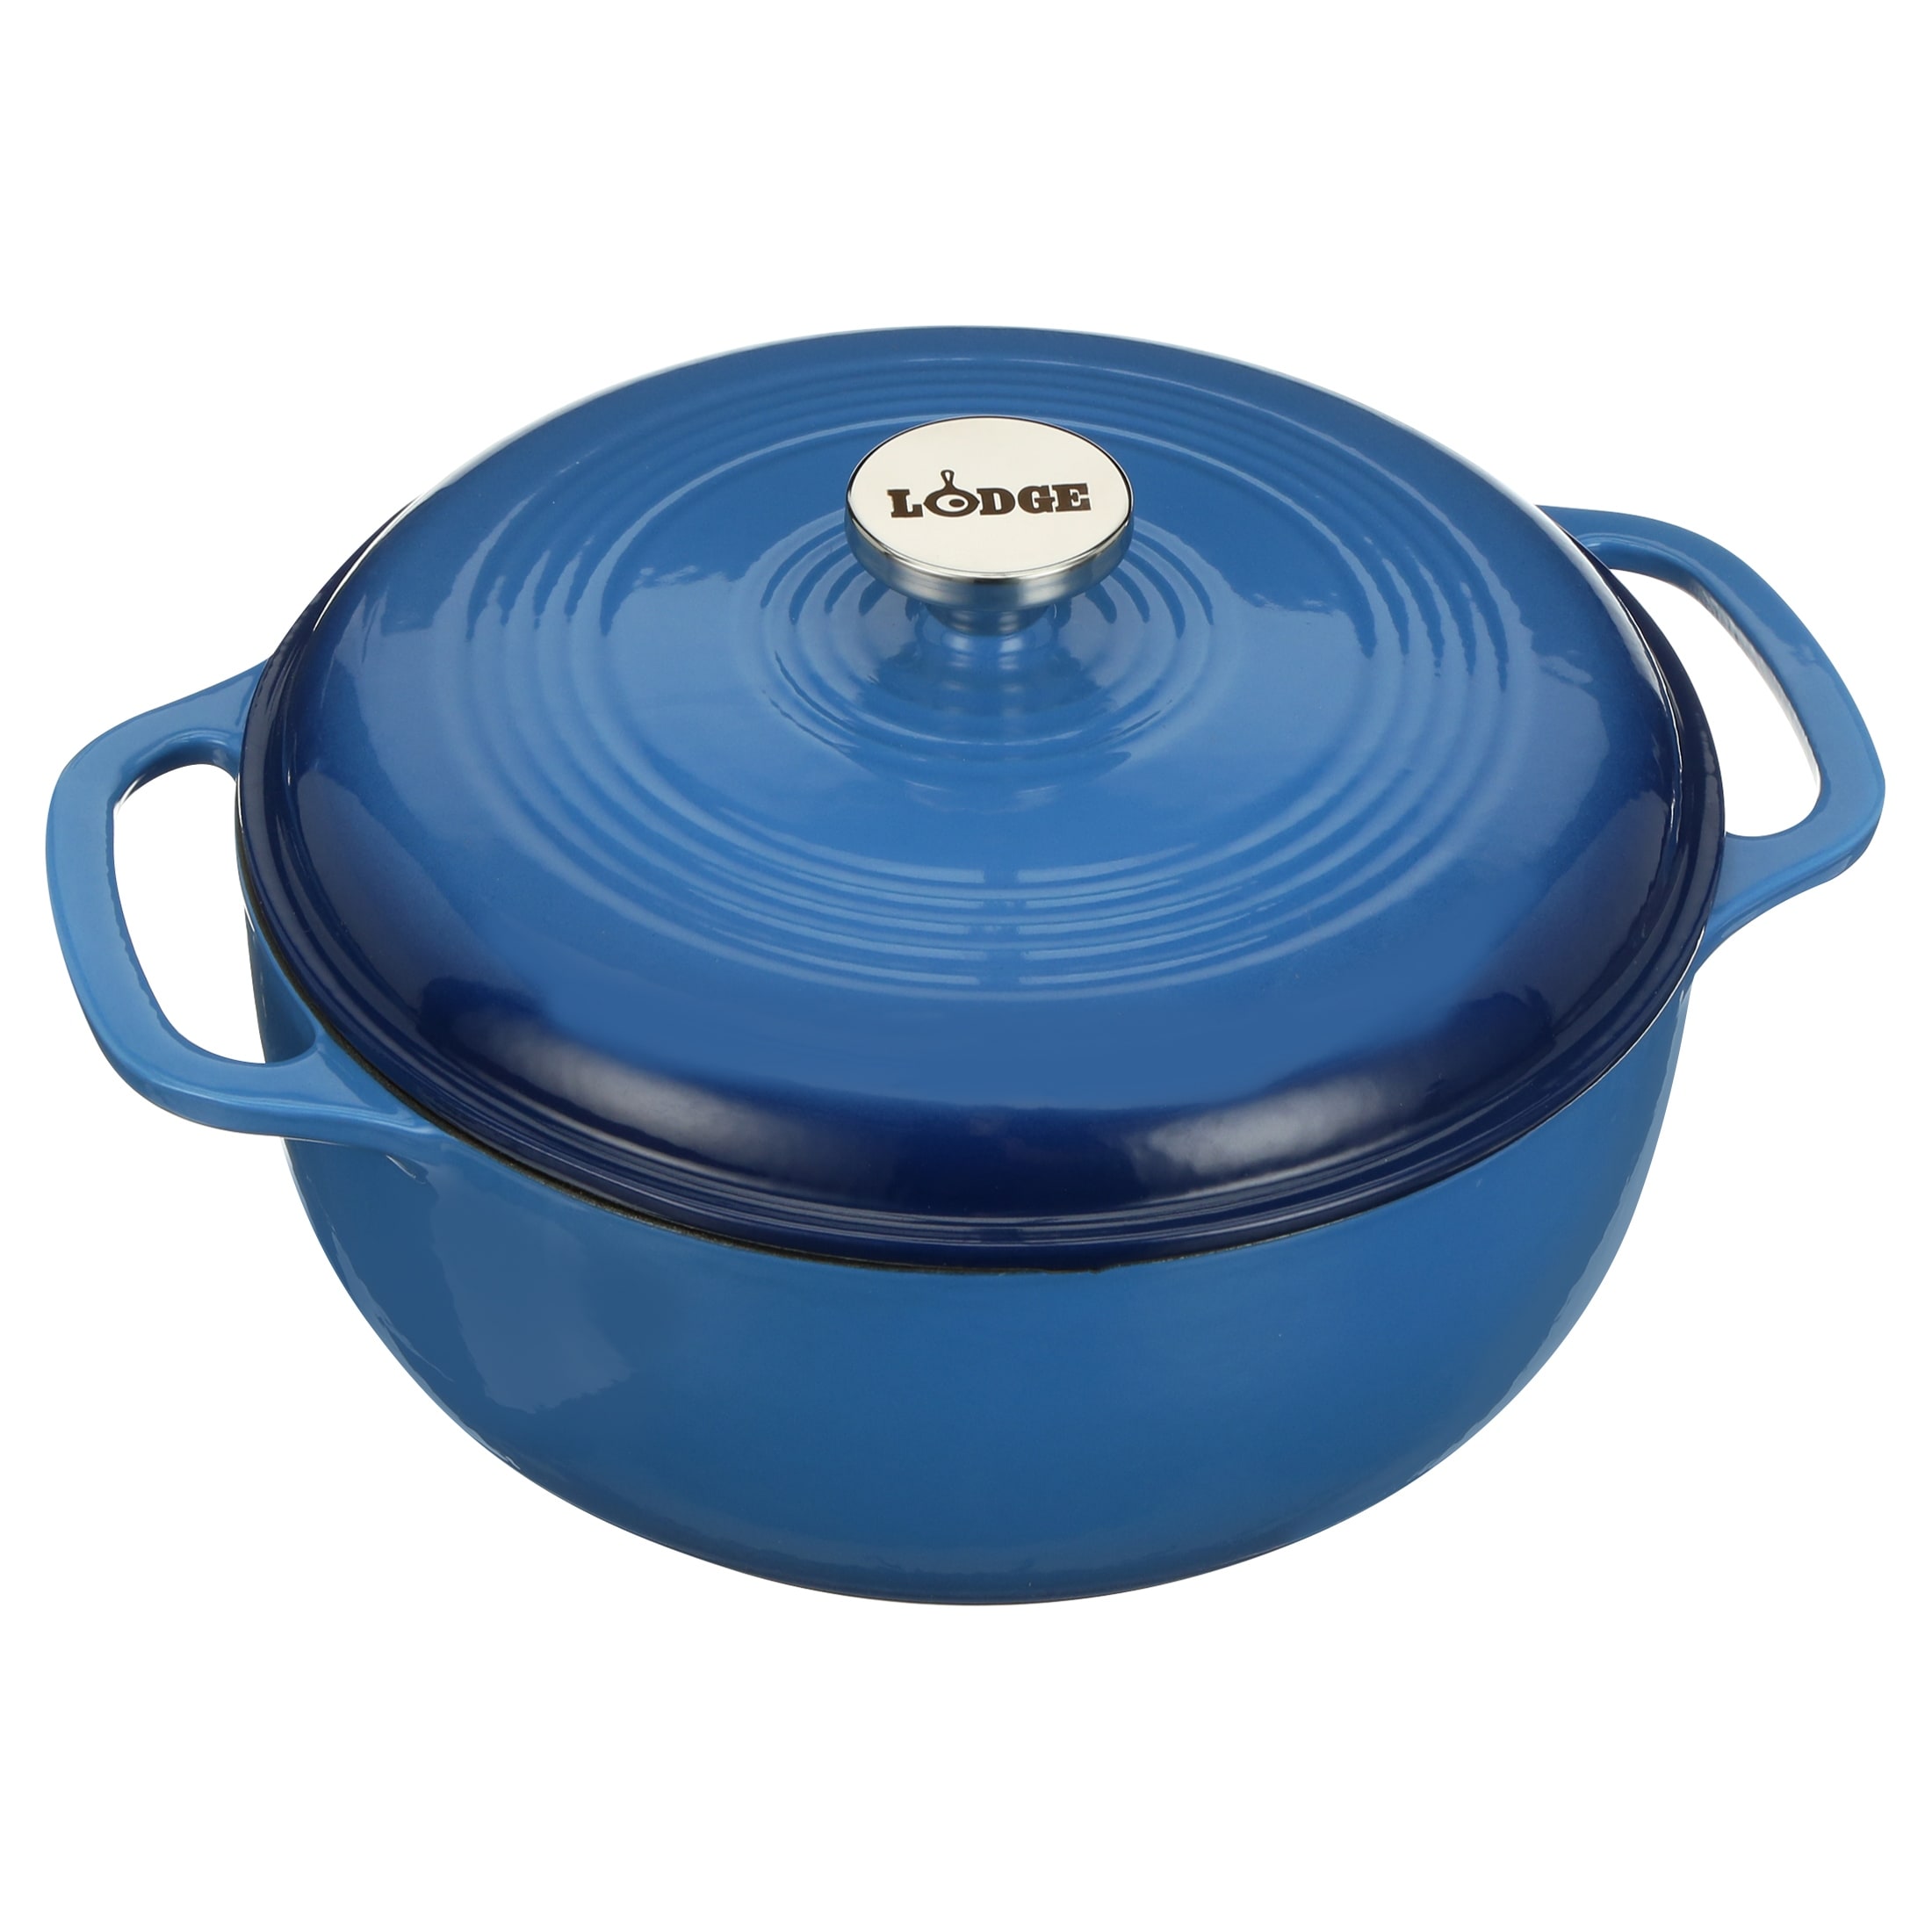 https://ak1.ostkcdn.com/images/products/is/images/direct/c40c097284d93a1061fa03c3b2e3aed7e2dd5c10/Cast-Iron-6-Quart-Enameled-Cast-Iron-Dutch-Oven.jpg